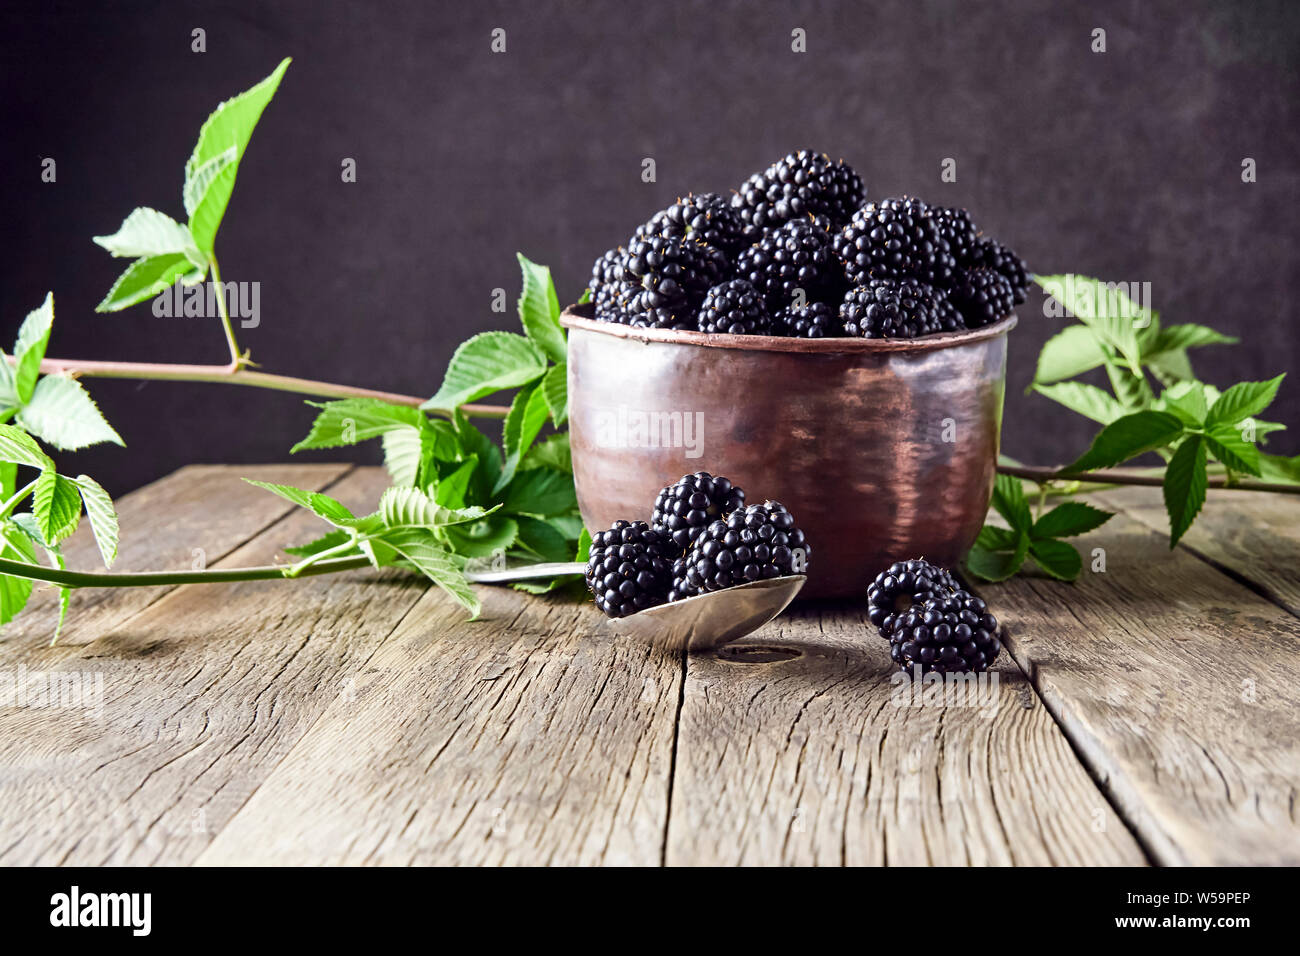 Ripe blackberries with leaves in old copper dishes on old wooden boards and lying next to a spoon on a dark background. Stock Photo